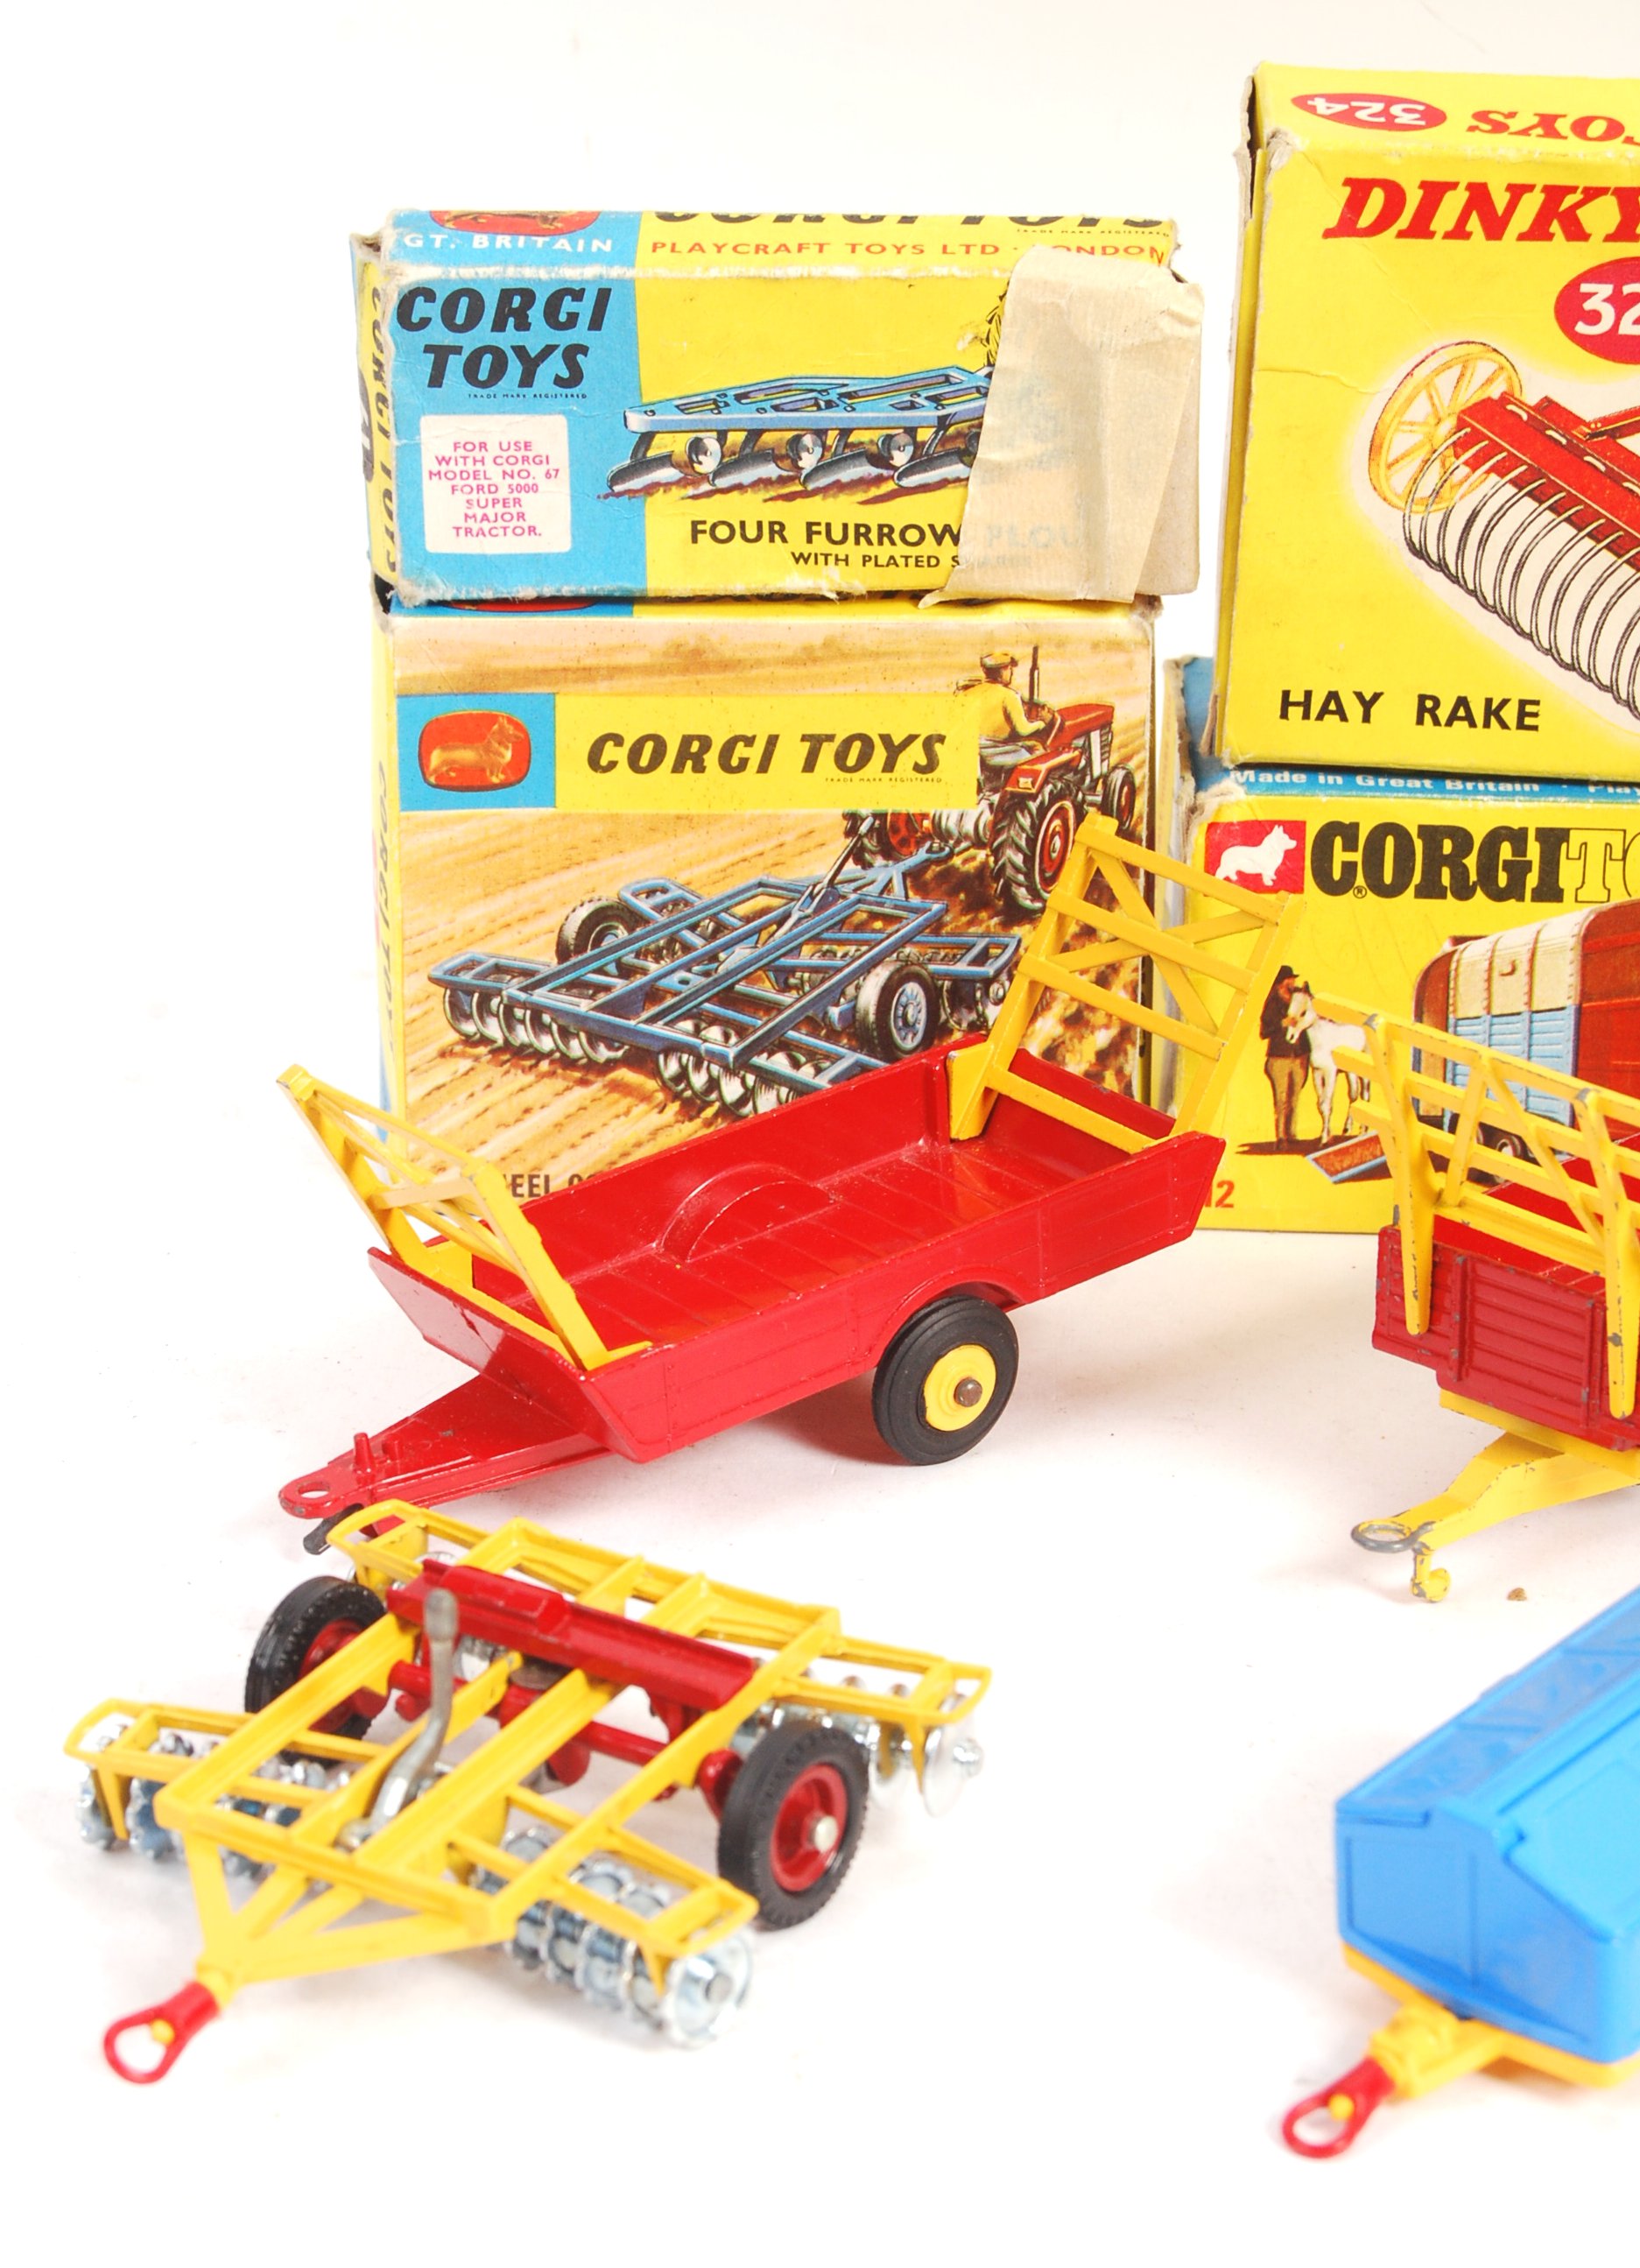 COLLECTION OF VINTAGE DINKY TOYS & CORGI TOYS DIECAST FARM MODELS - Image 2 of 5